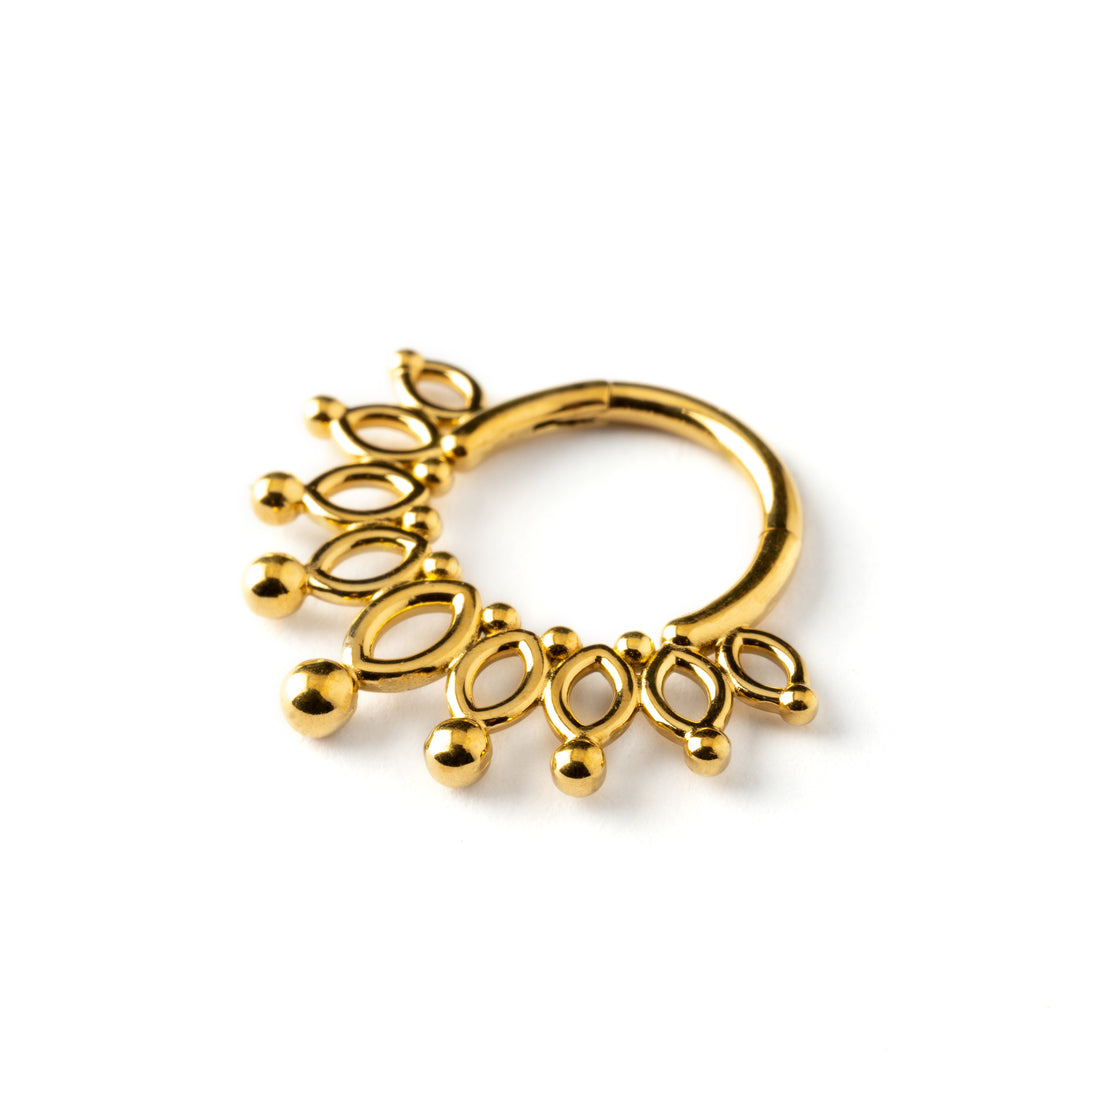 Anastasia gold surgical steel flower petals septum clicker right side view